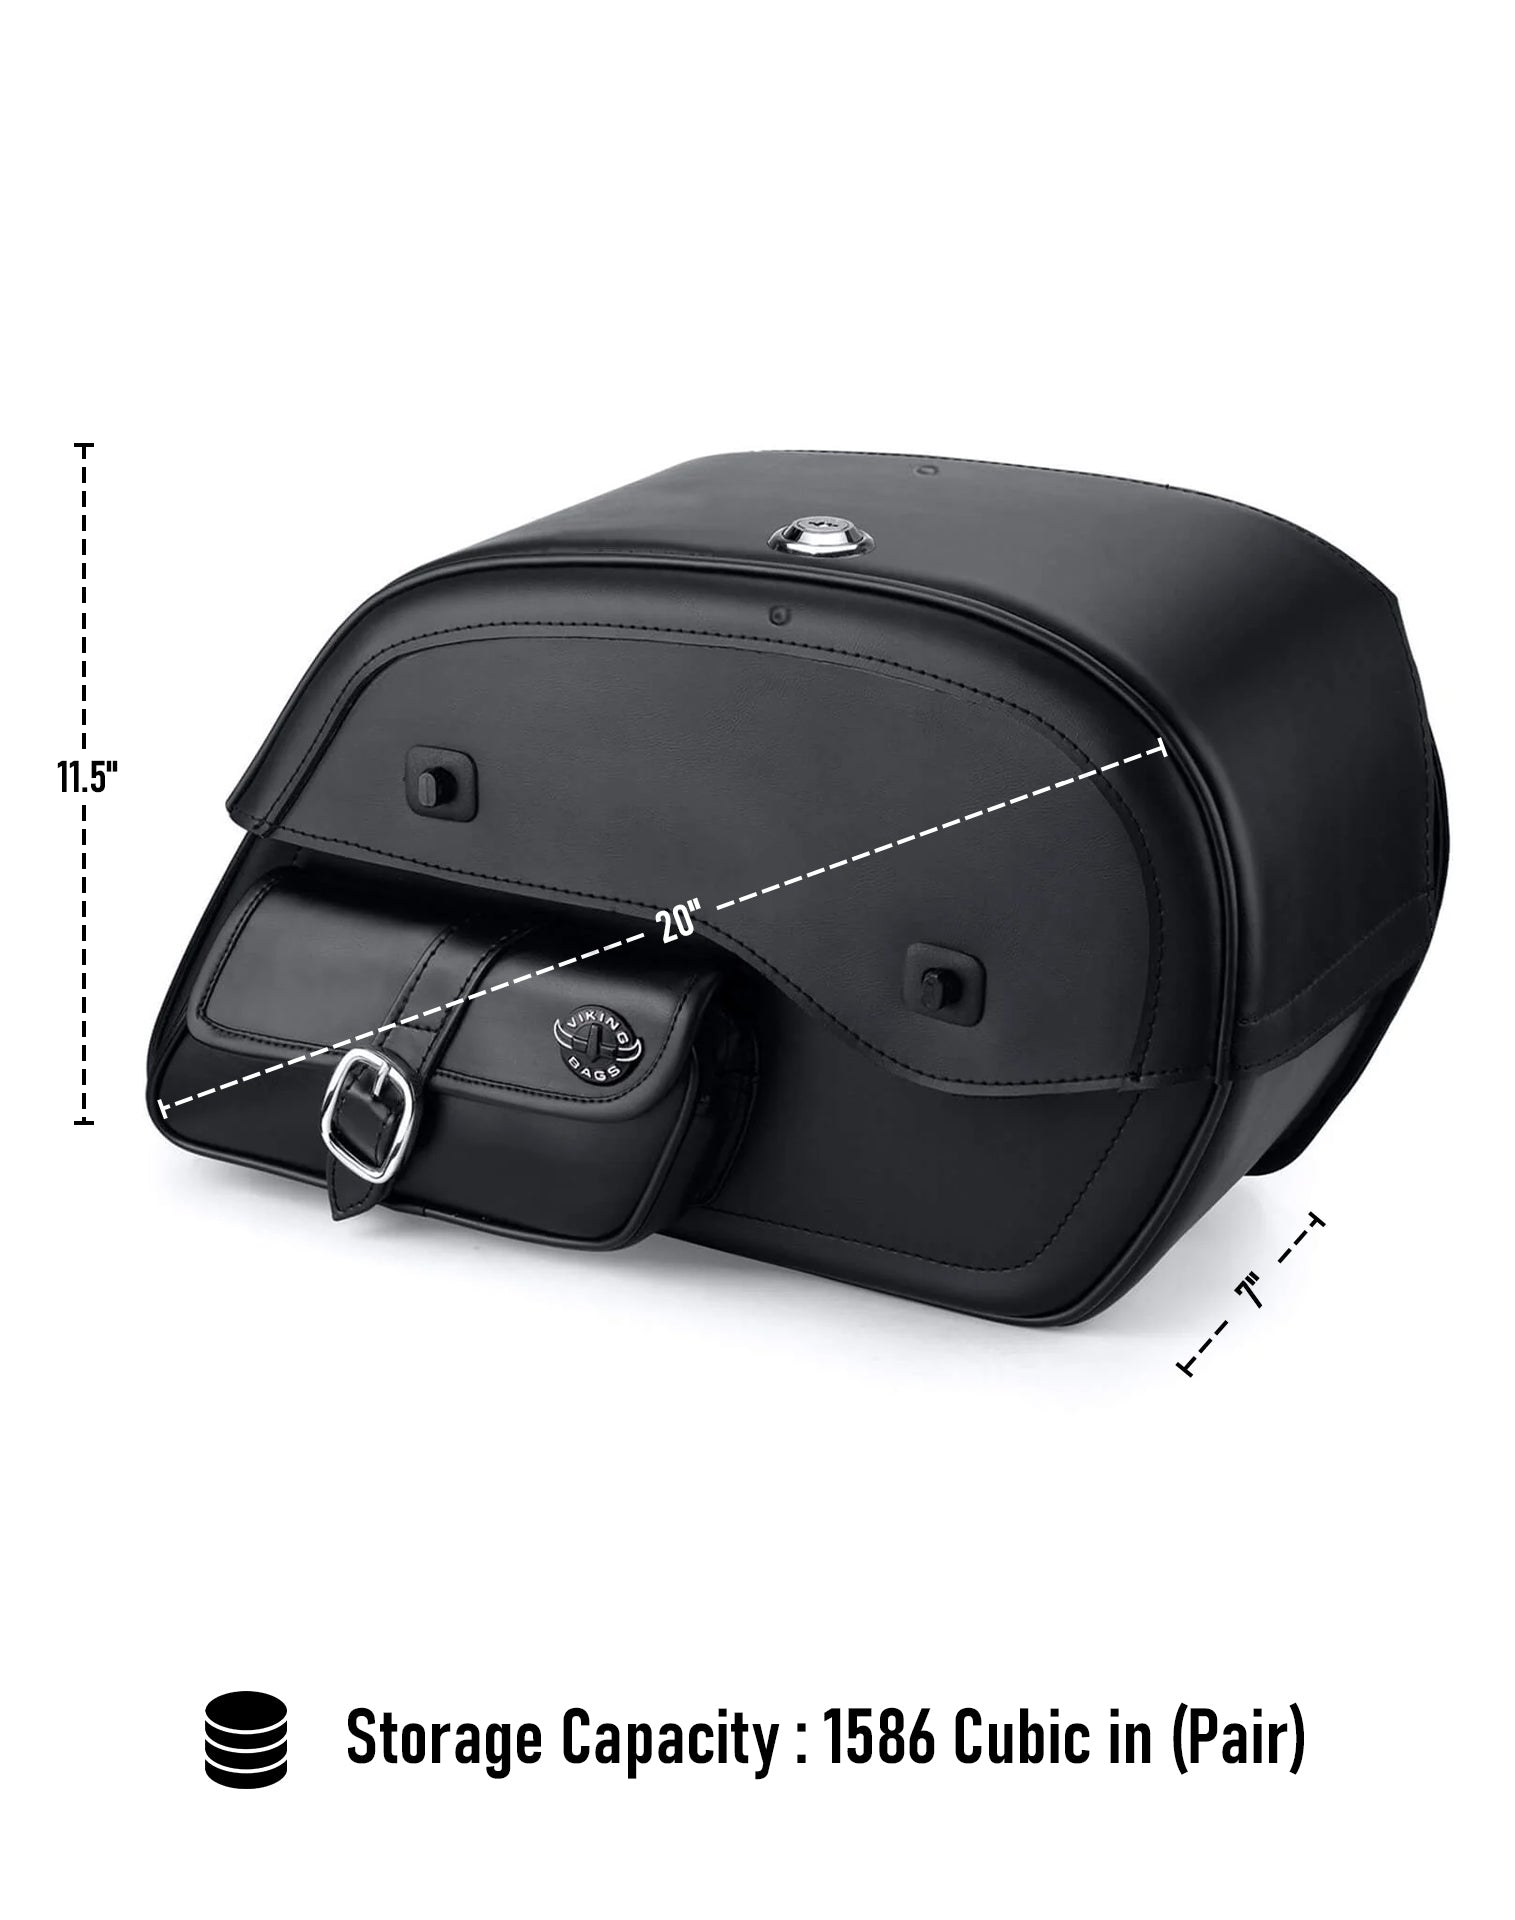 Viking Essential Side Pocket Large Shock Cutout Leather Motorcycle Saddlebags For Harley Sportster 1200 Super Low Xl1200T Can Store Your Ridings Gears